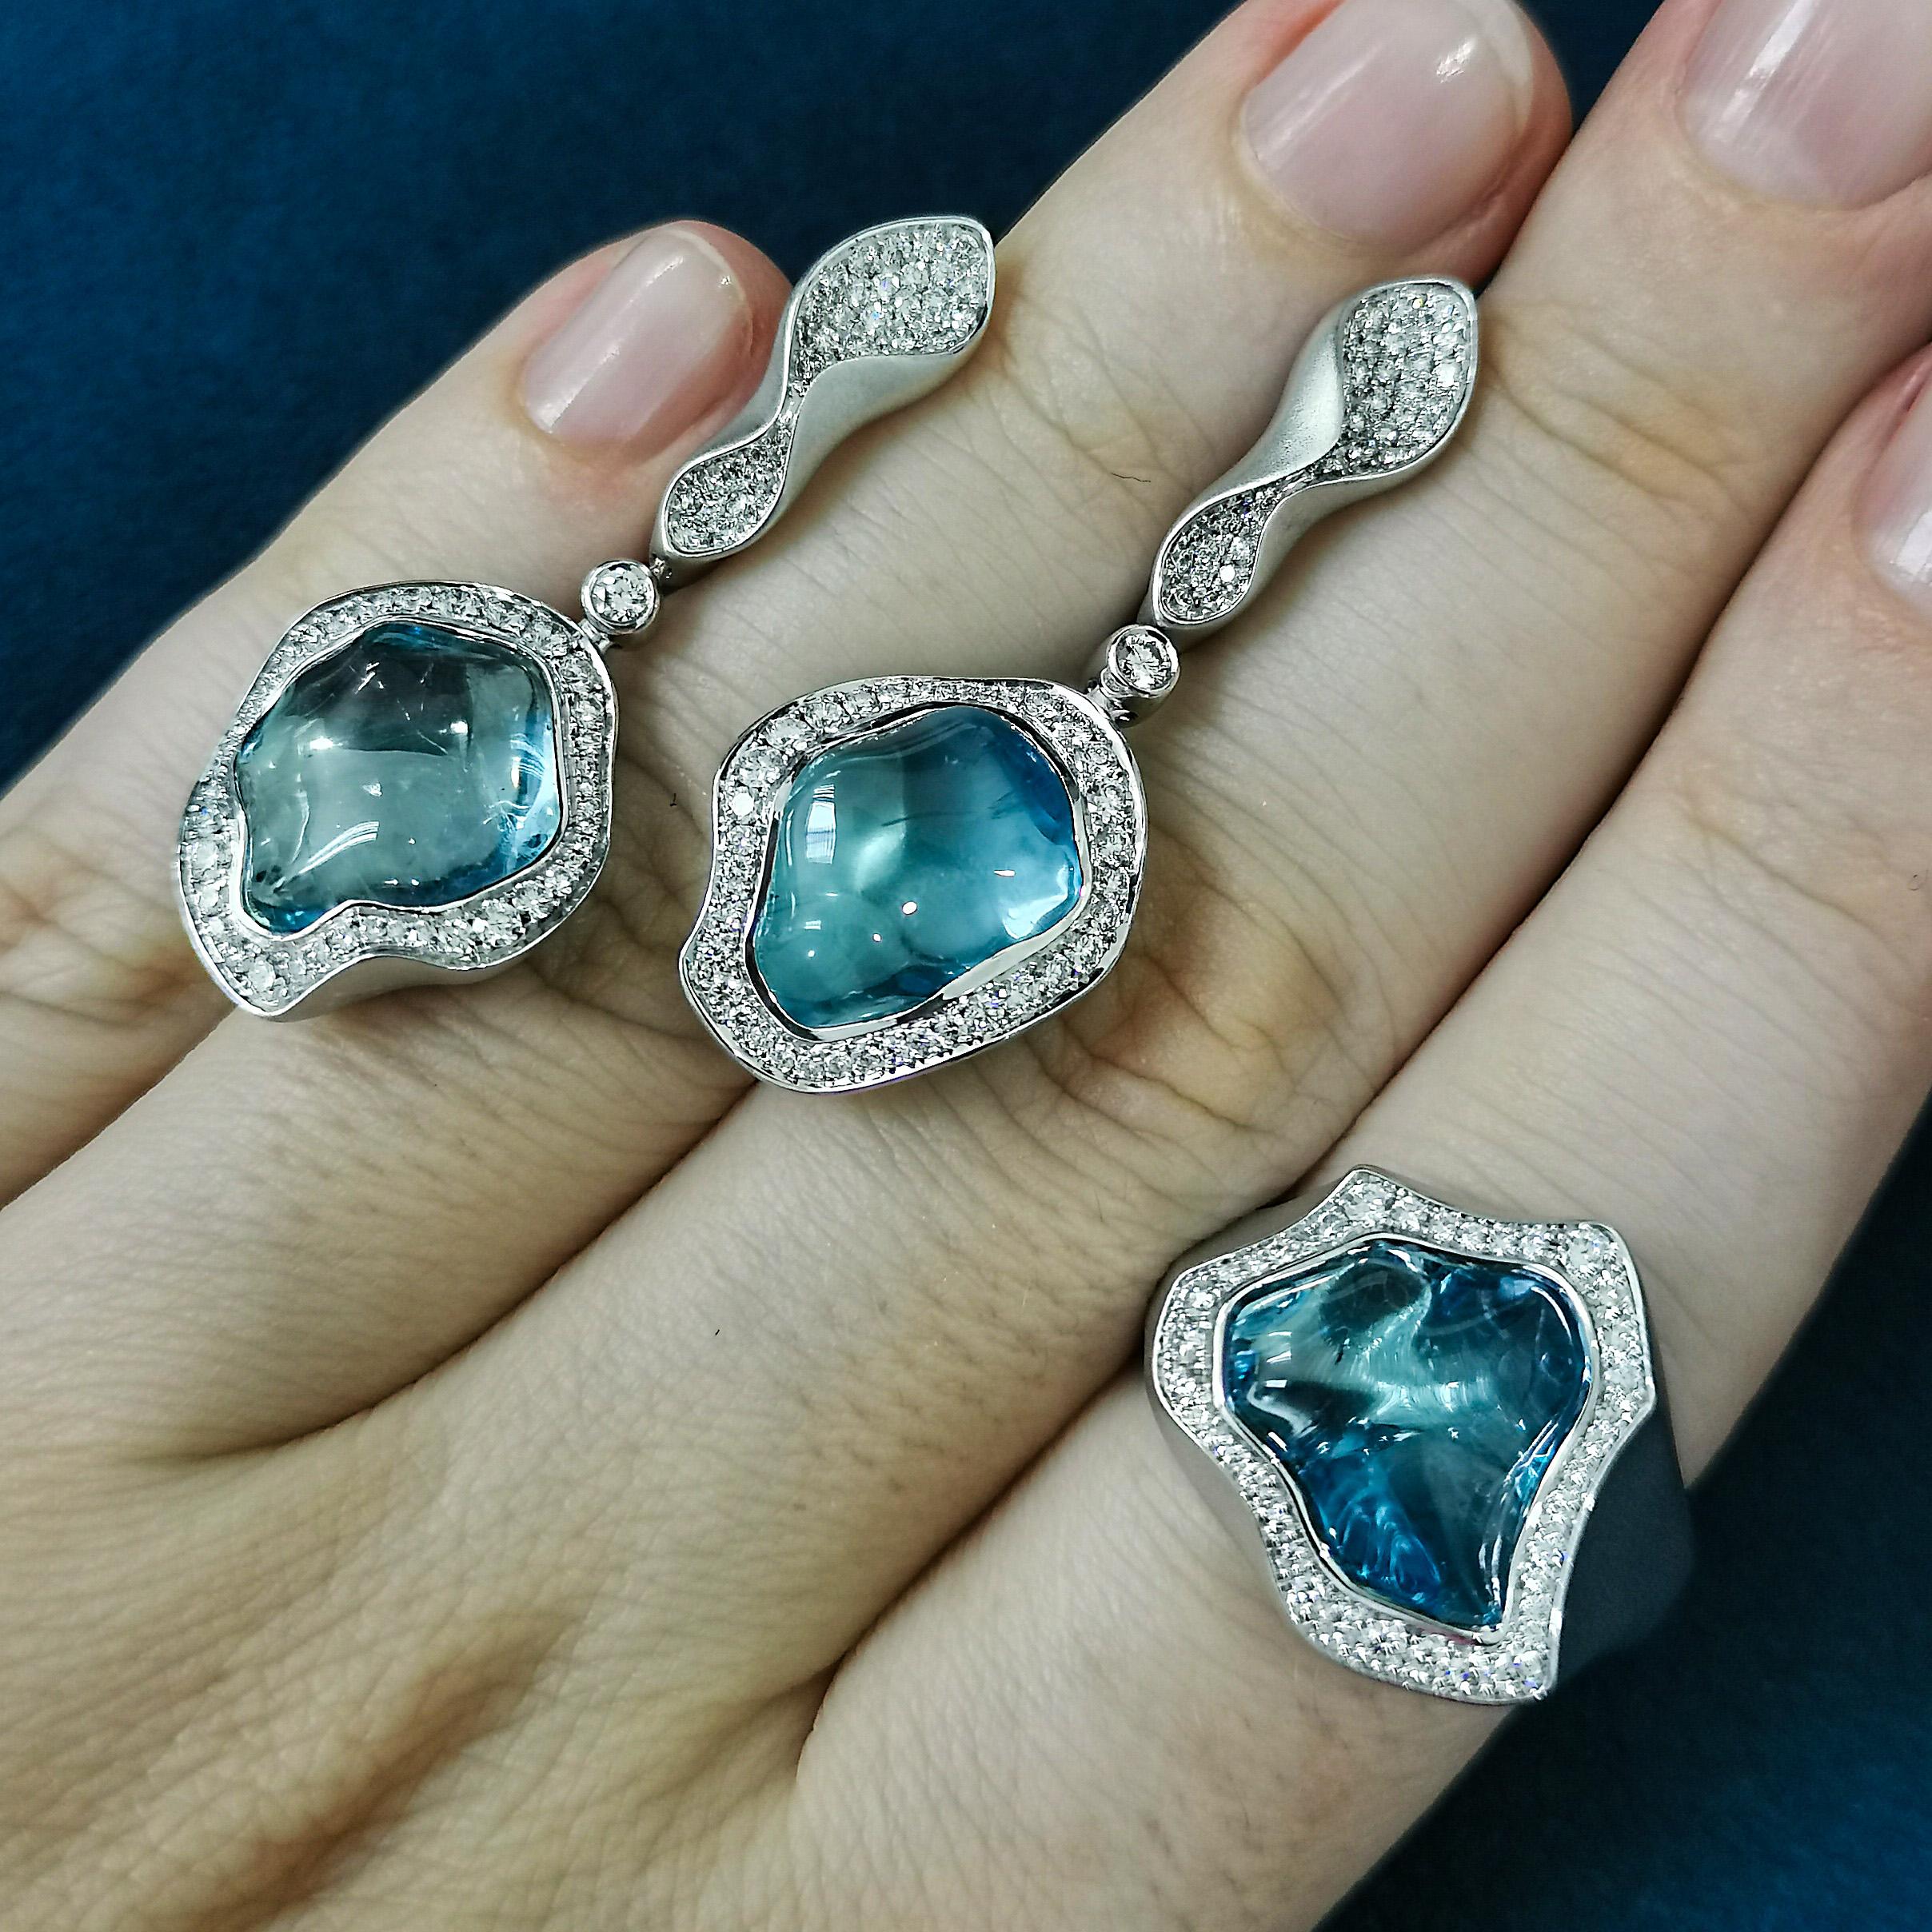 Aquamarine Diamonds 18 Karat White Matte Gold Spectrum Suite

Exquisite and stylish, this 18K White Gold, Aquamarine, Diamonds Ring from the Spectrum collection is sure to draw attention. A stunning baroque-shaped Aquamarine is exquisitely